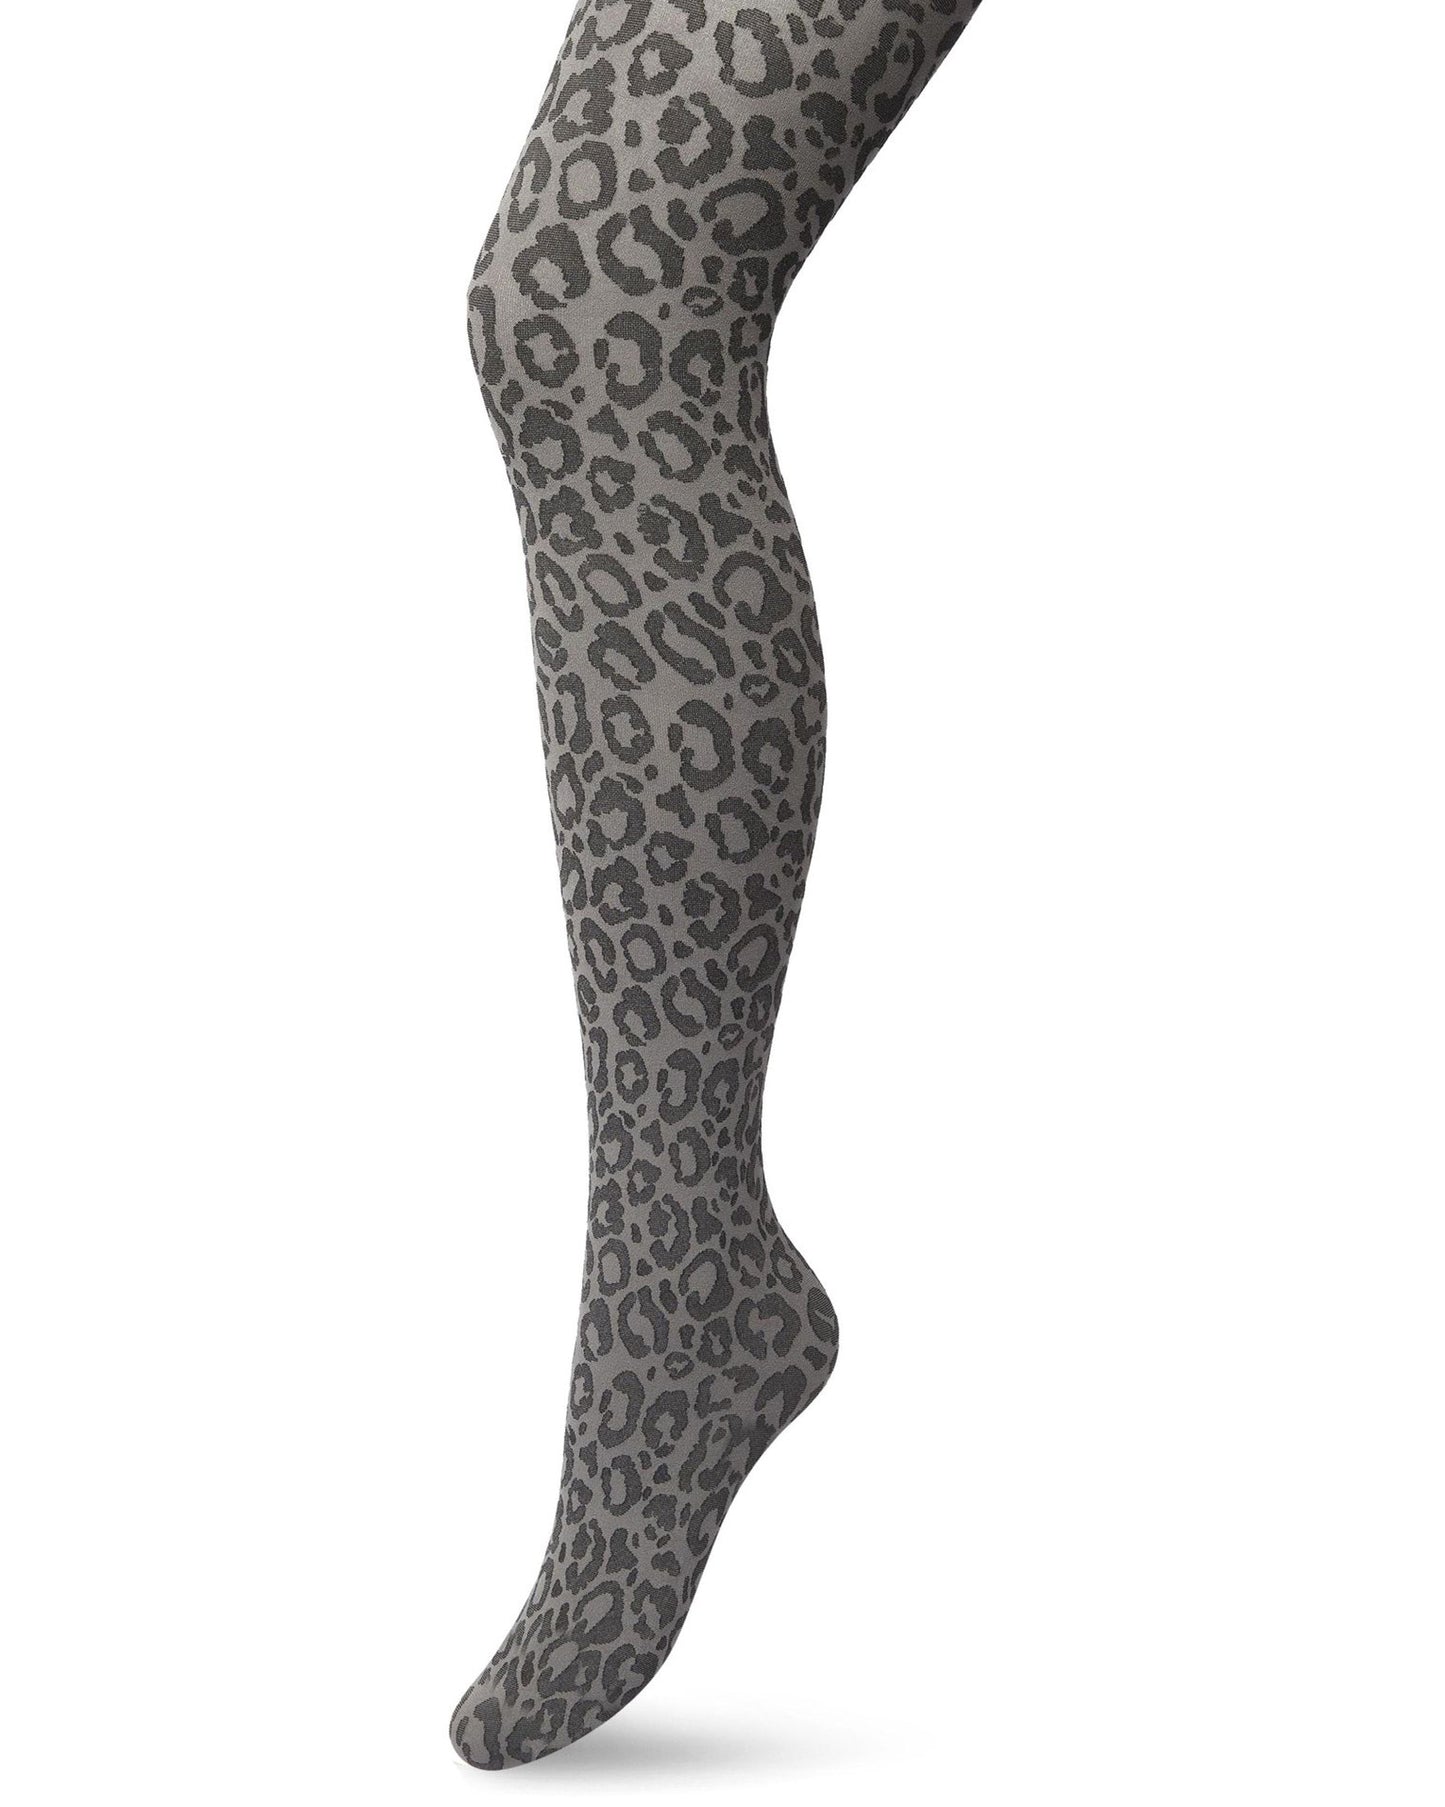 Bonnie Doon - Opaque Panther Tights -Grey fashion tights with a woven leopard print style pattern in a darker tone, flat seams, gusset and deep comfort waistband.